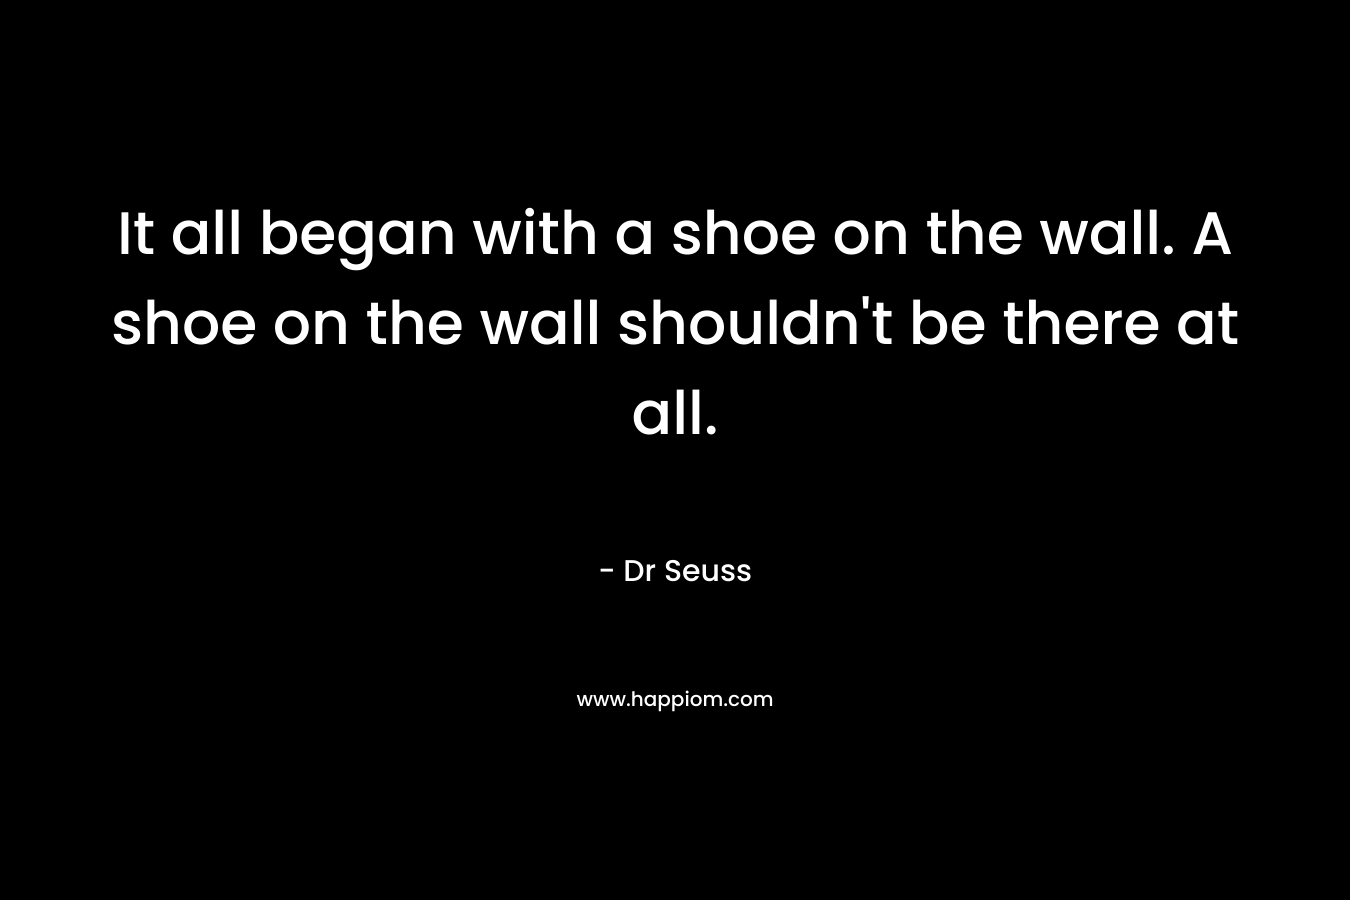 It all began with a shoe on the wall. A shoe on the wall shouldn’t be there at all. – Dr Seuss